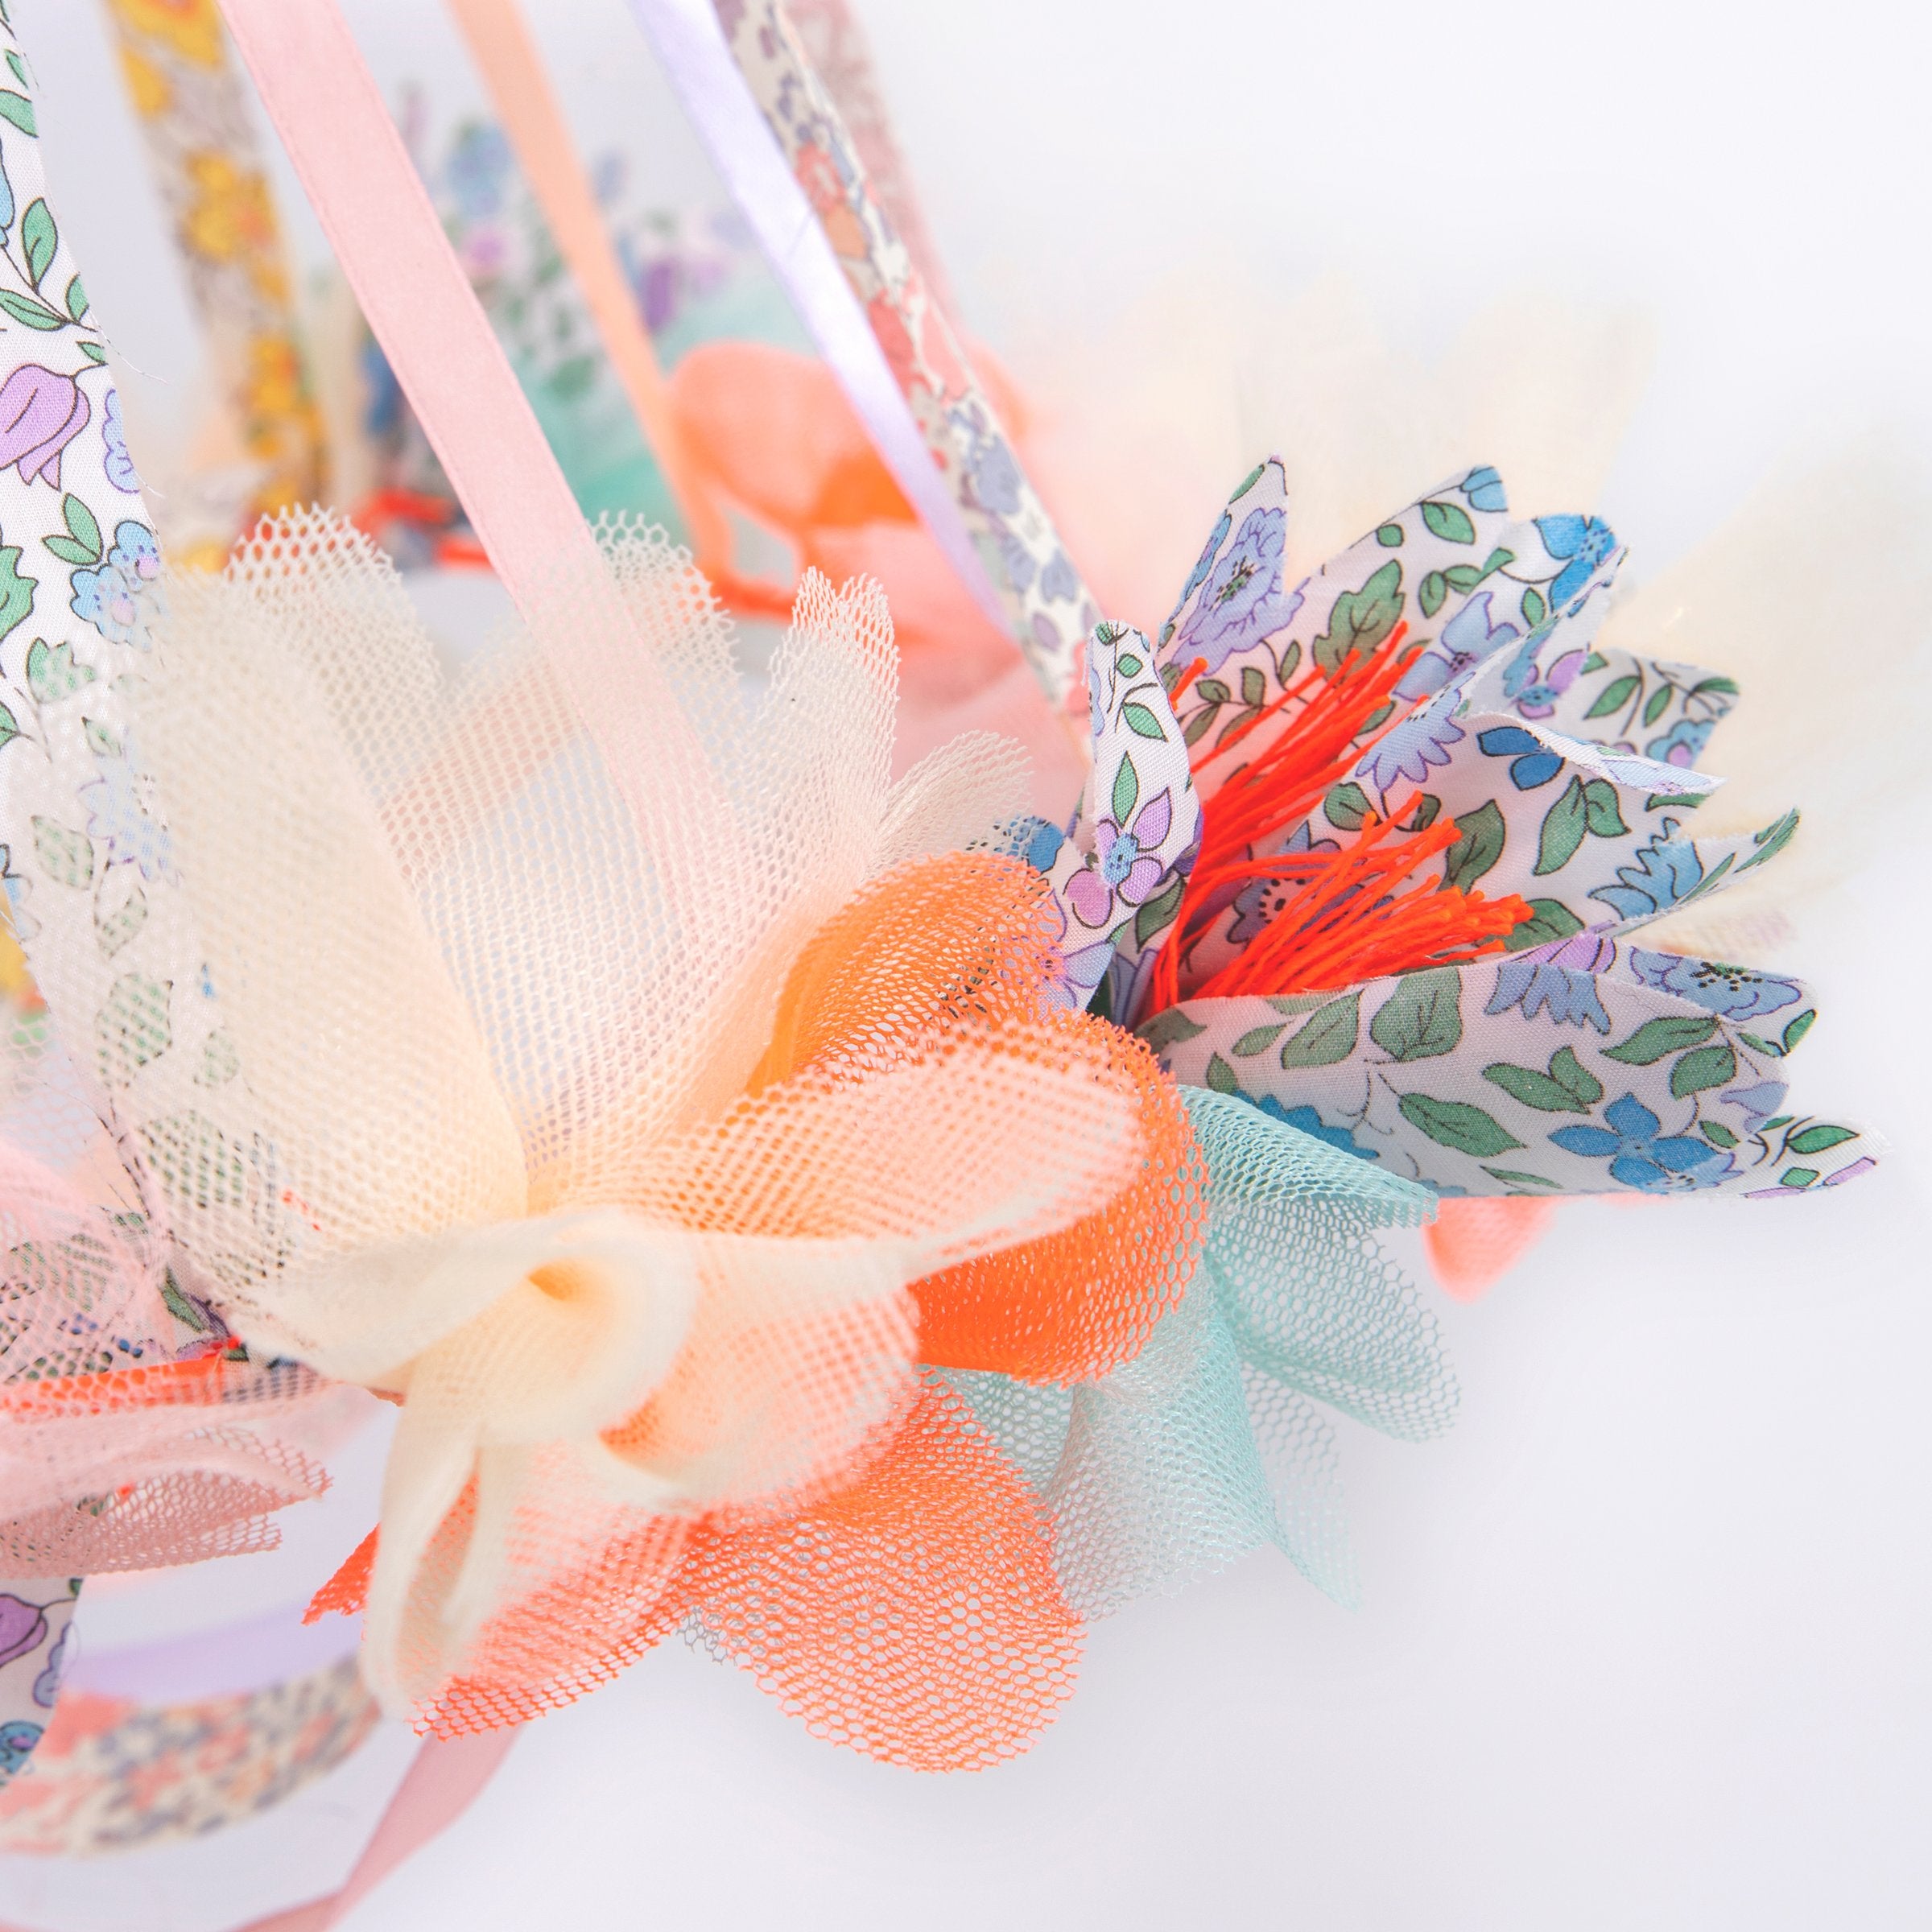 This hanging flower decoration is made from colourful fabric with streamers.